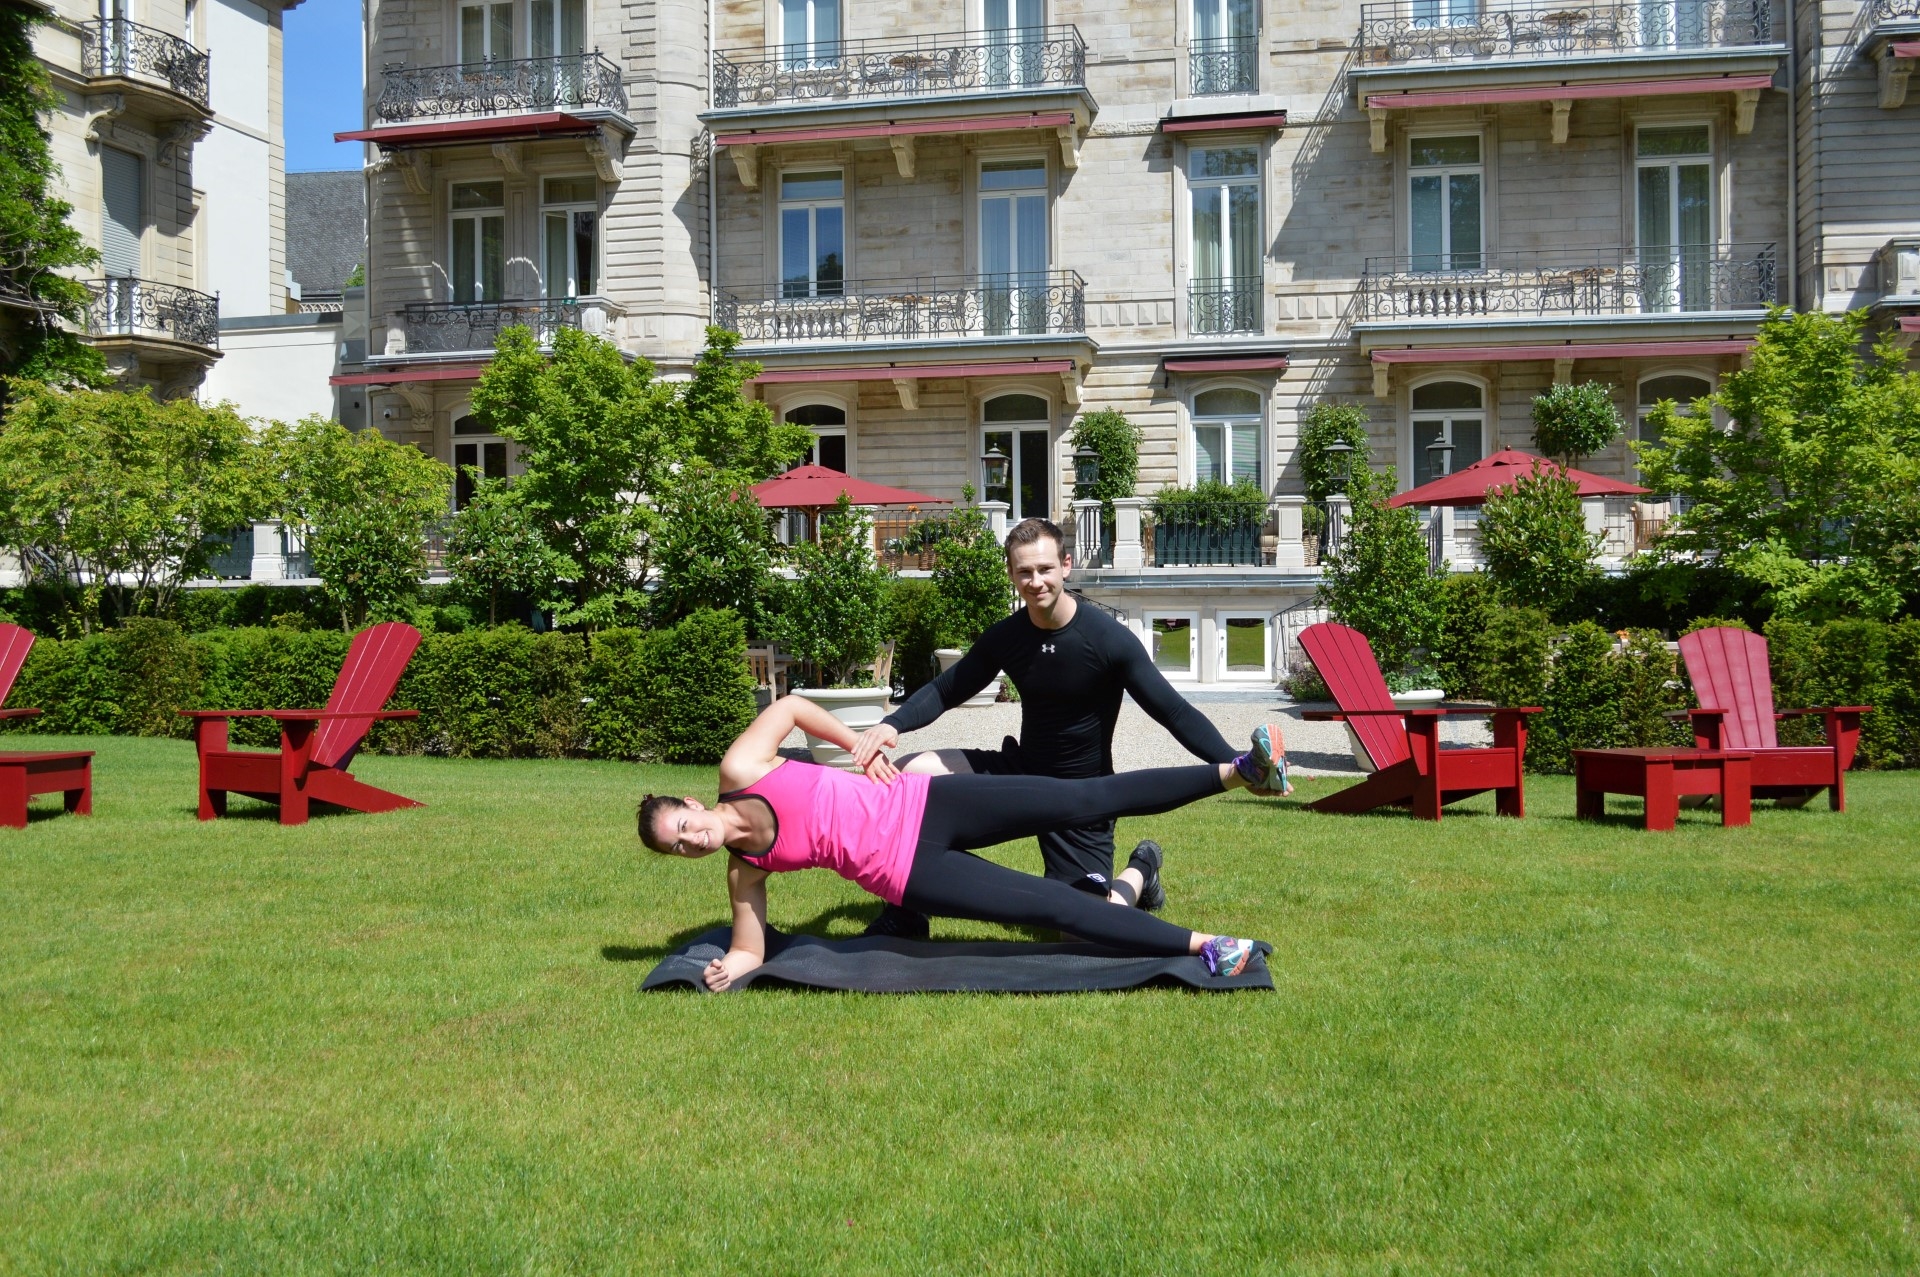 Training Baden Baden style - Brenners Park-Hotel and Spa